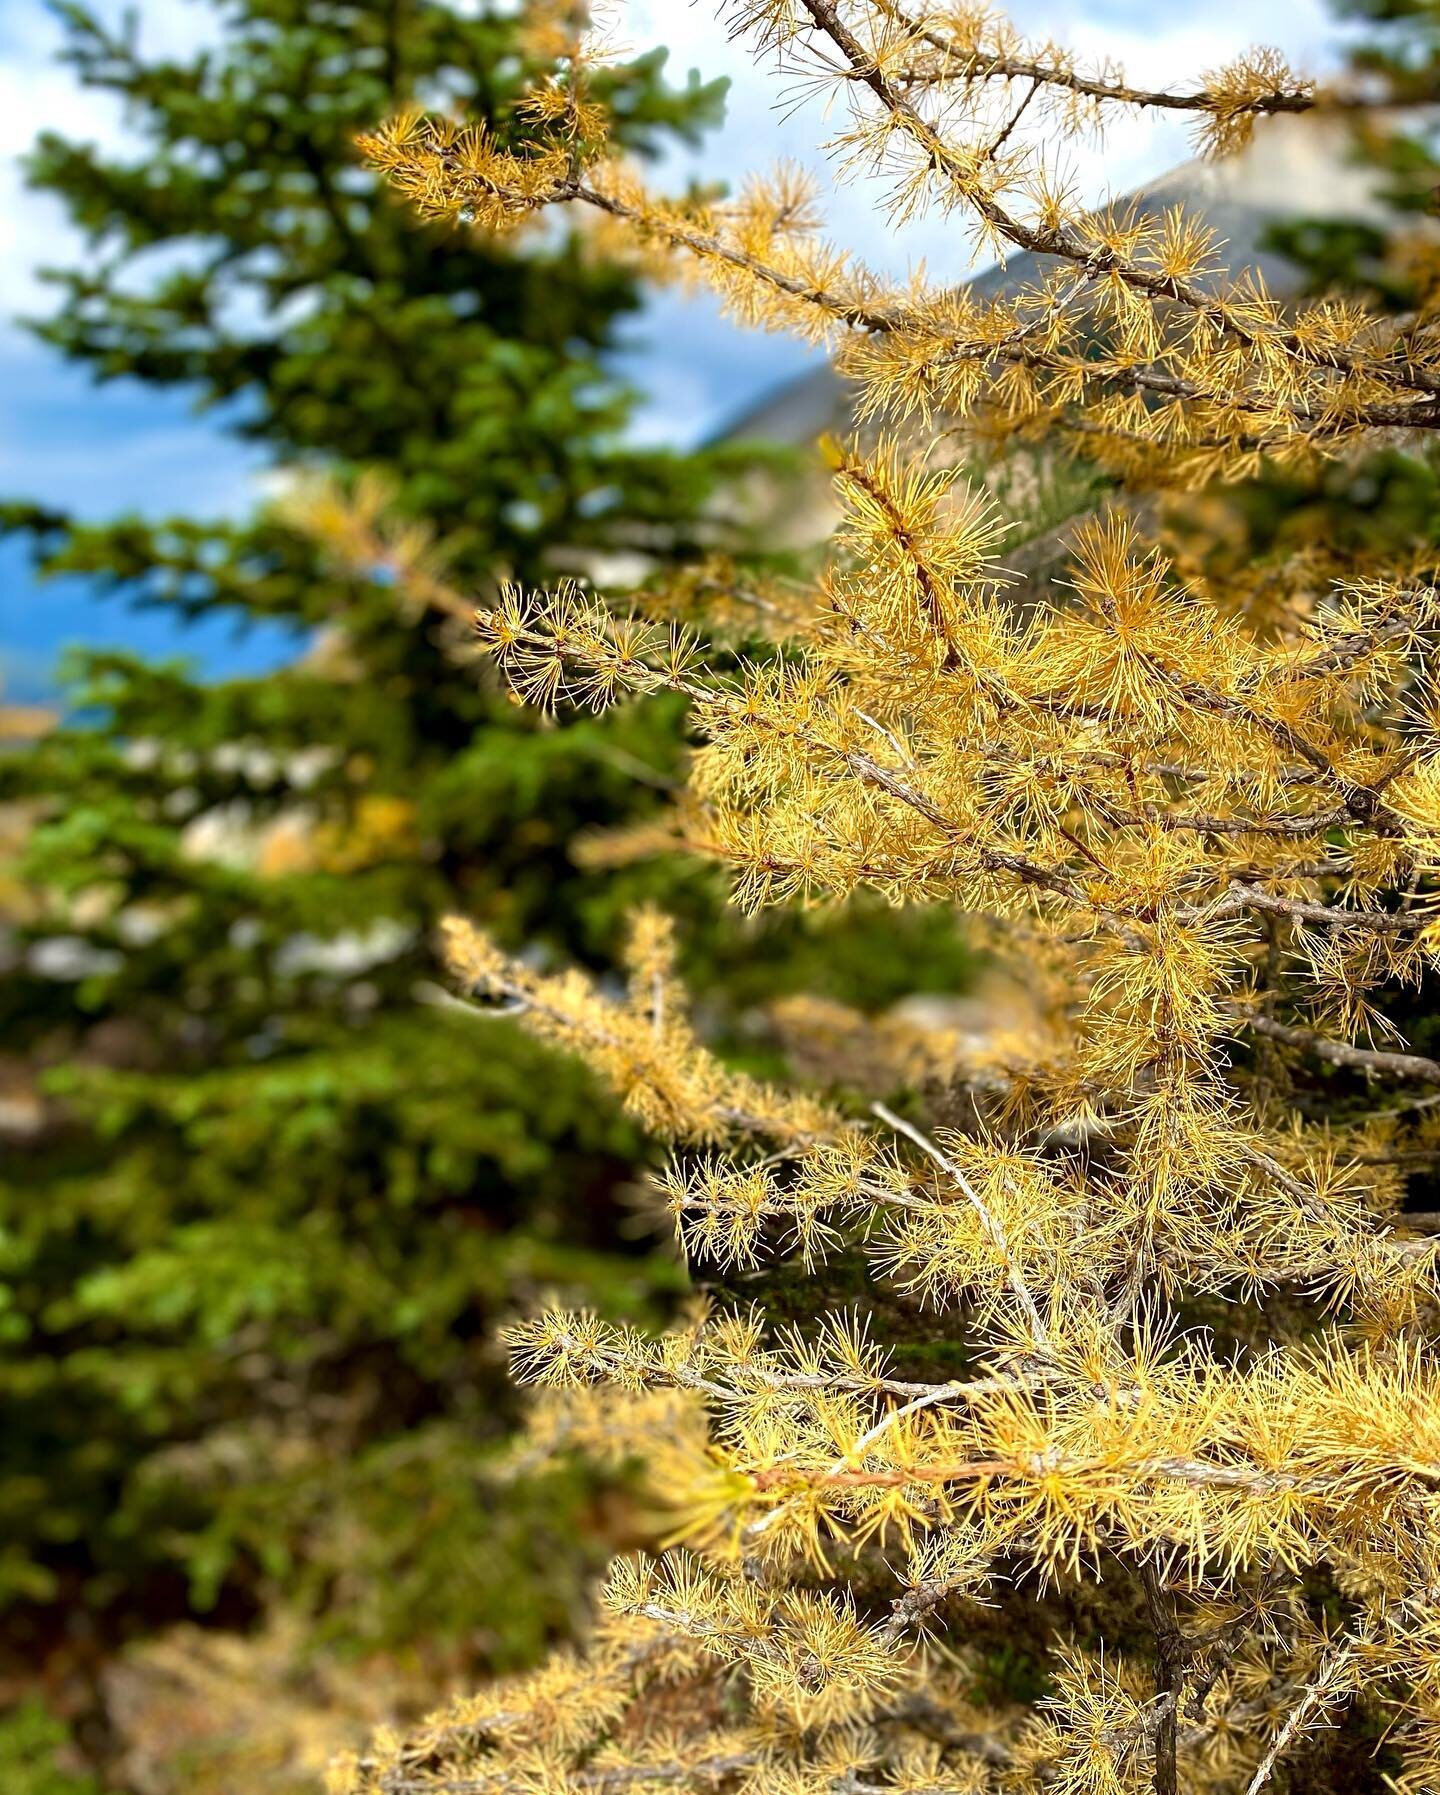 Larches are out! Hiked a very quiet beautiful hike with @maryminnett and @dj_danerz! Mary left us leaving smarter after teaching us that what I was seeing was in fact not a dehydrated lemon slice, but Rugosa Coral - as old as 470 million years!! Add 